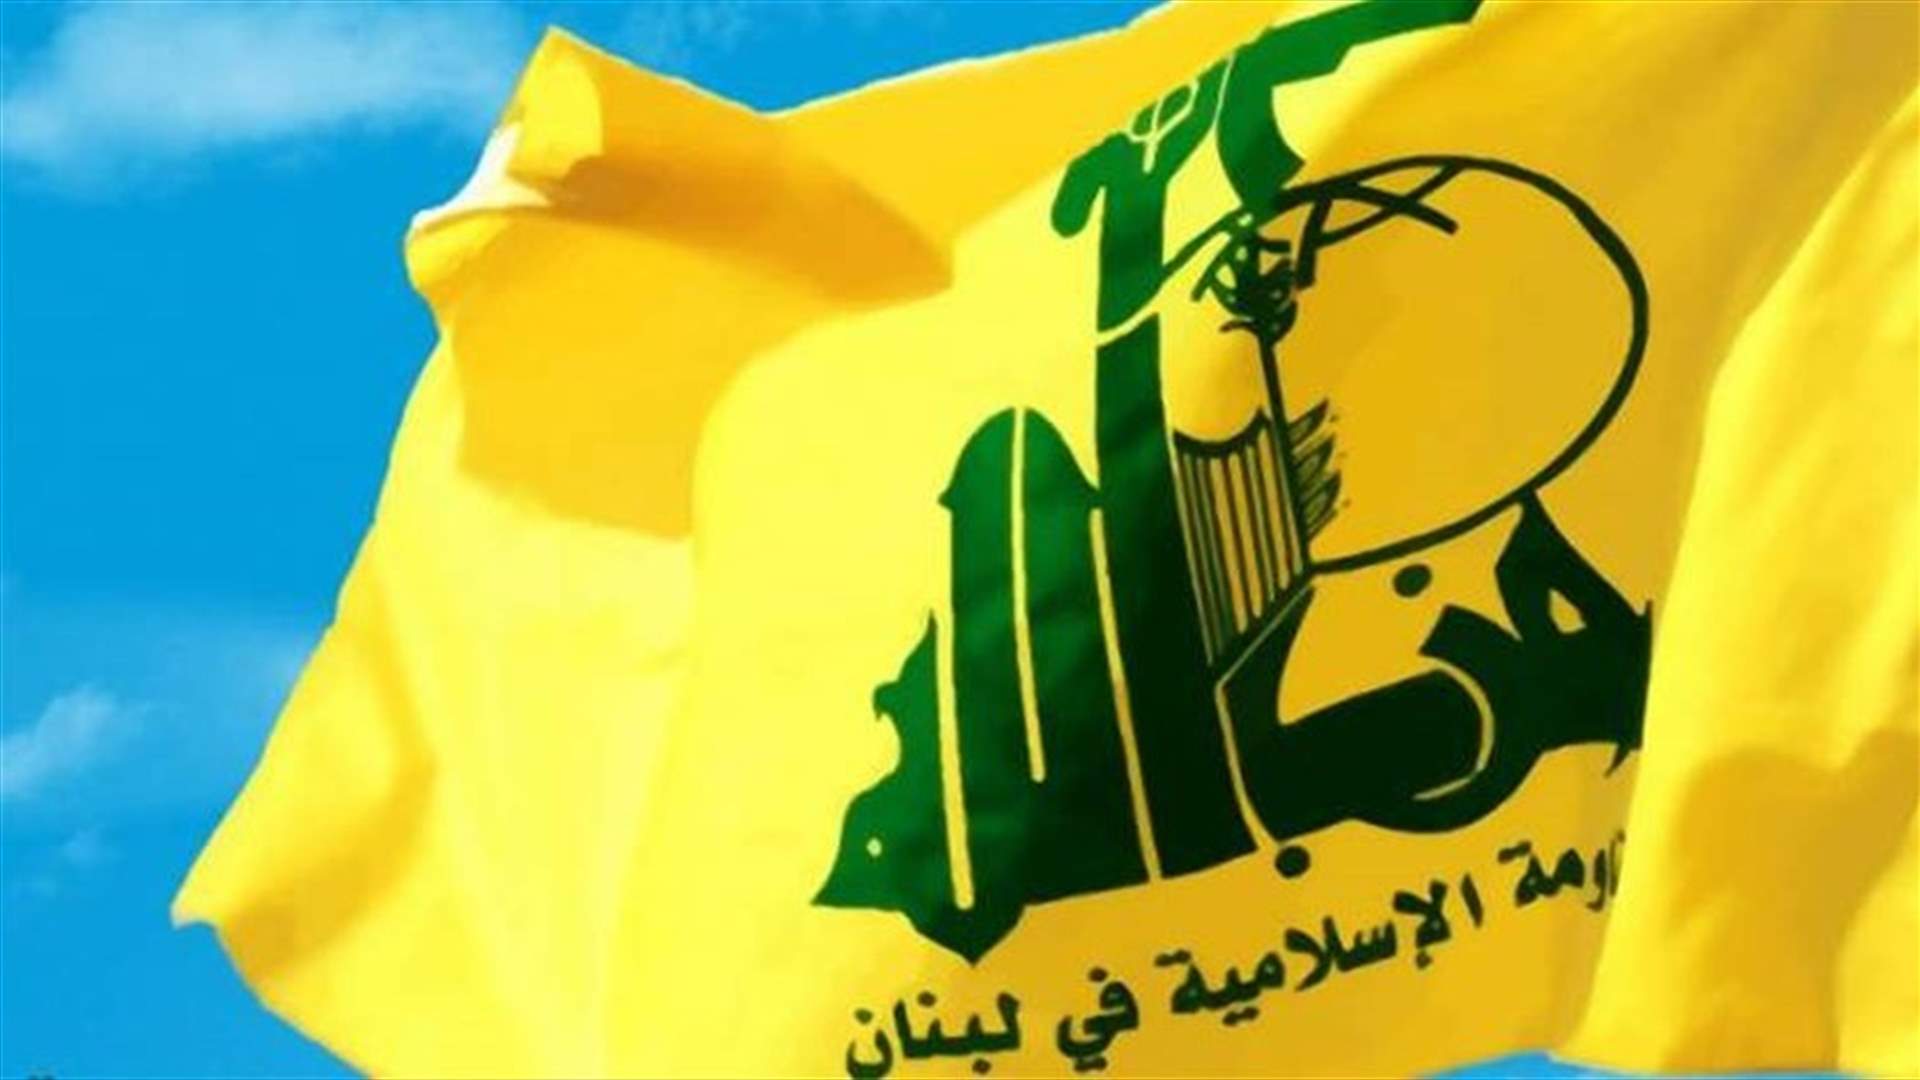 Remarks attributed to Nasrallah by “Farda News” website not true – Hezbollah